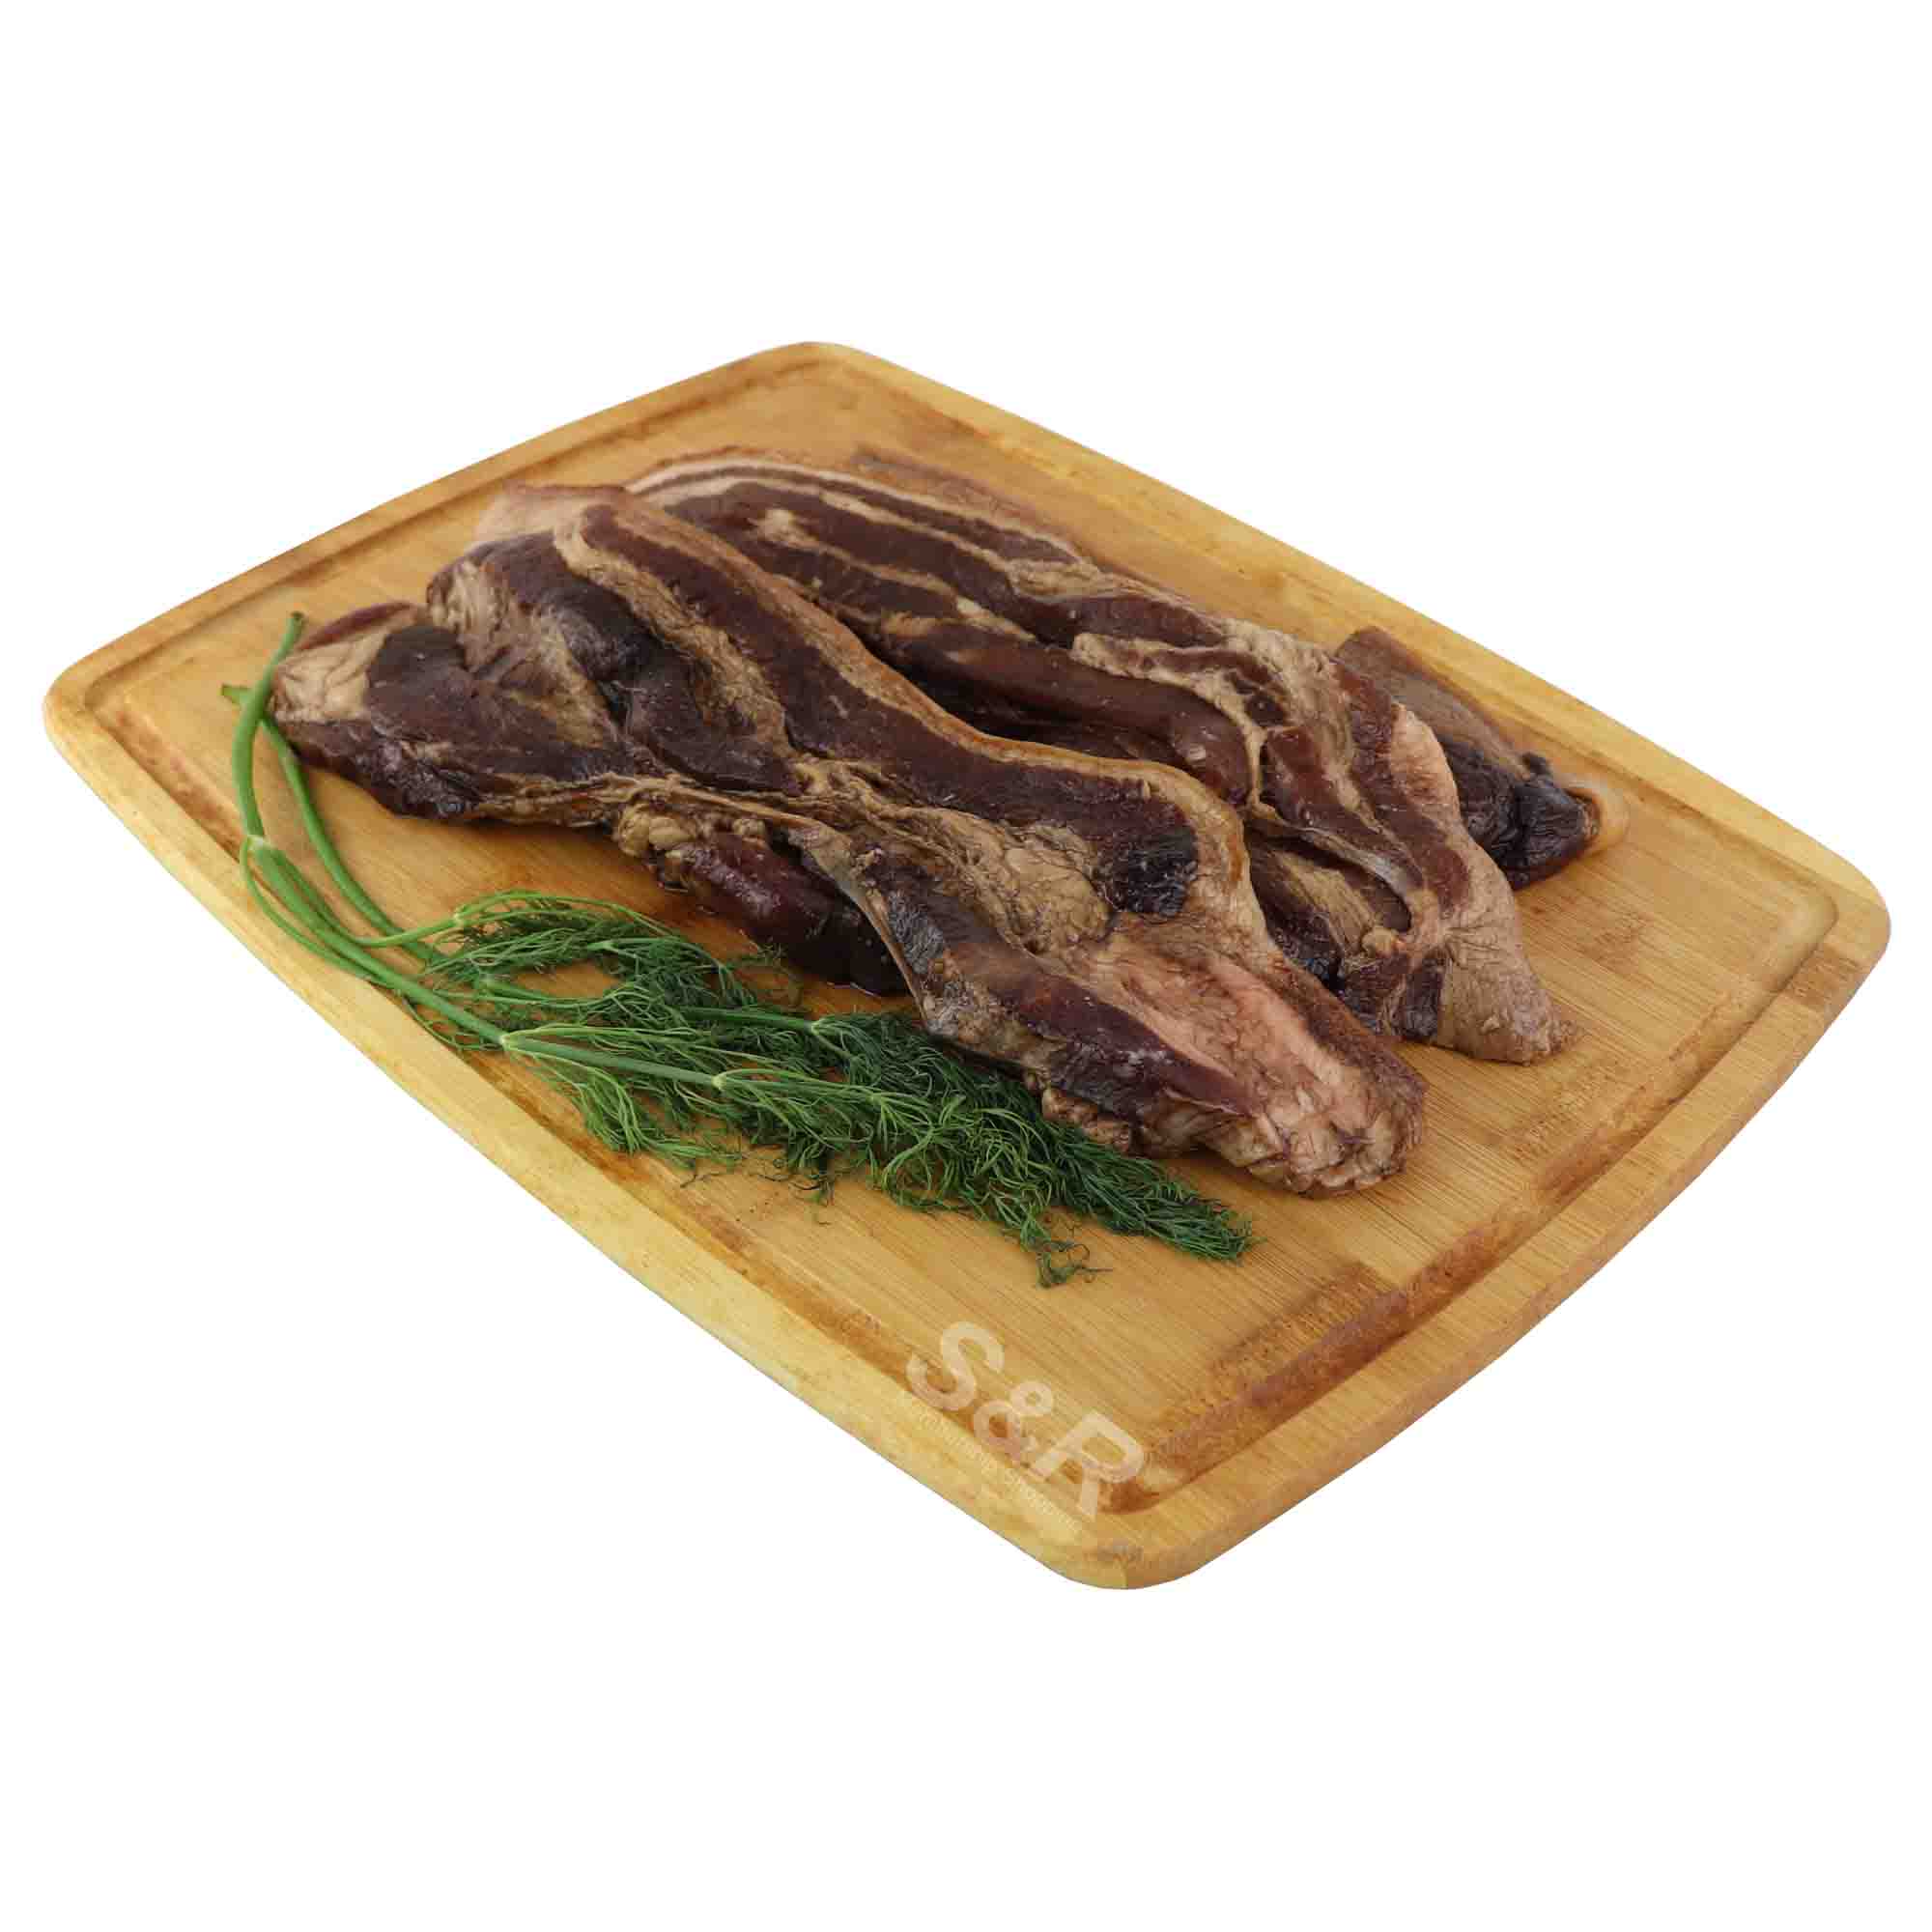 Members' Value Country Style Pork BBQ approx. 1.5kg